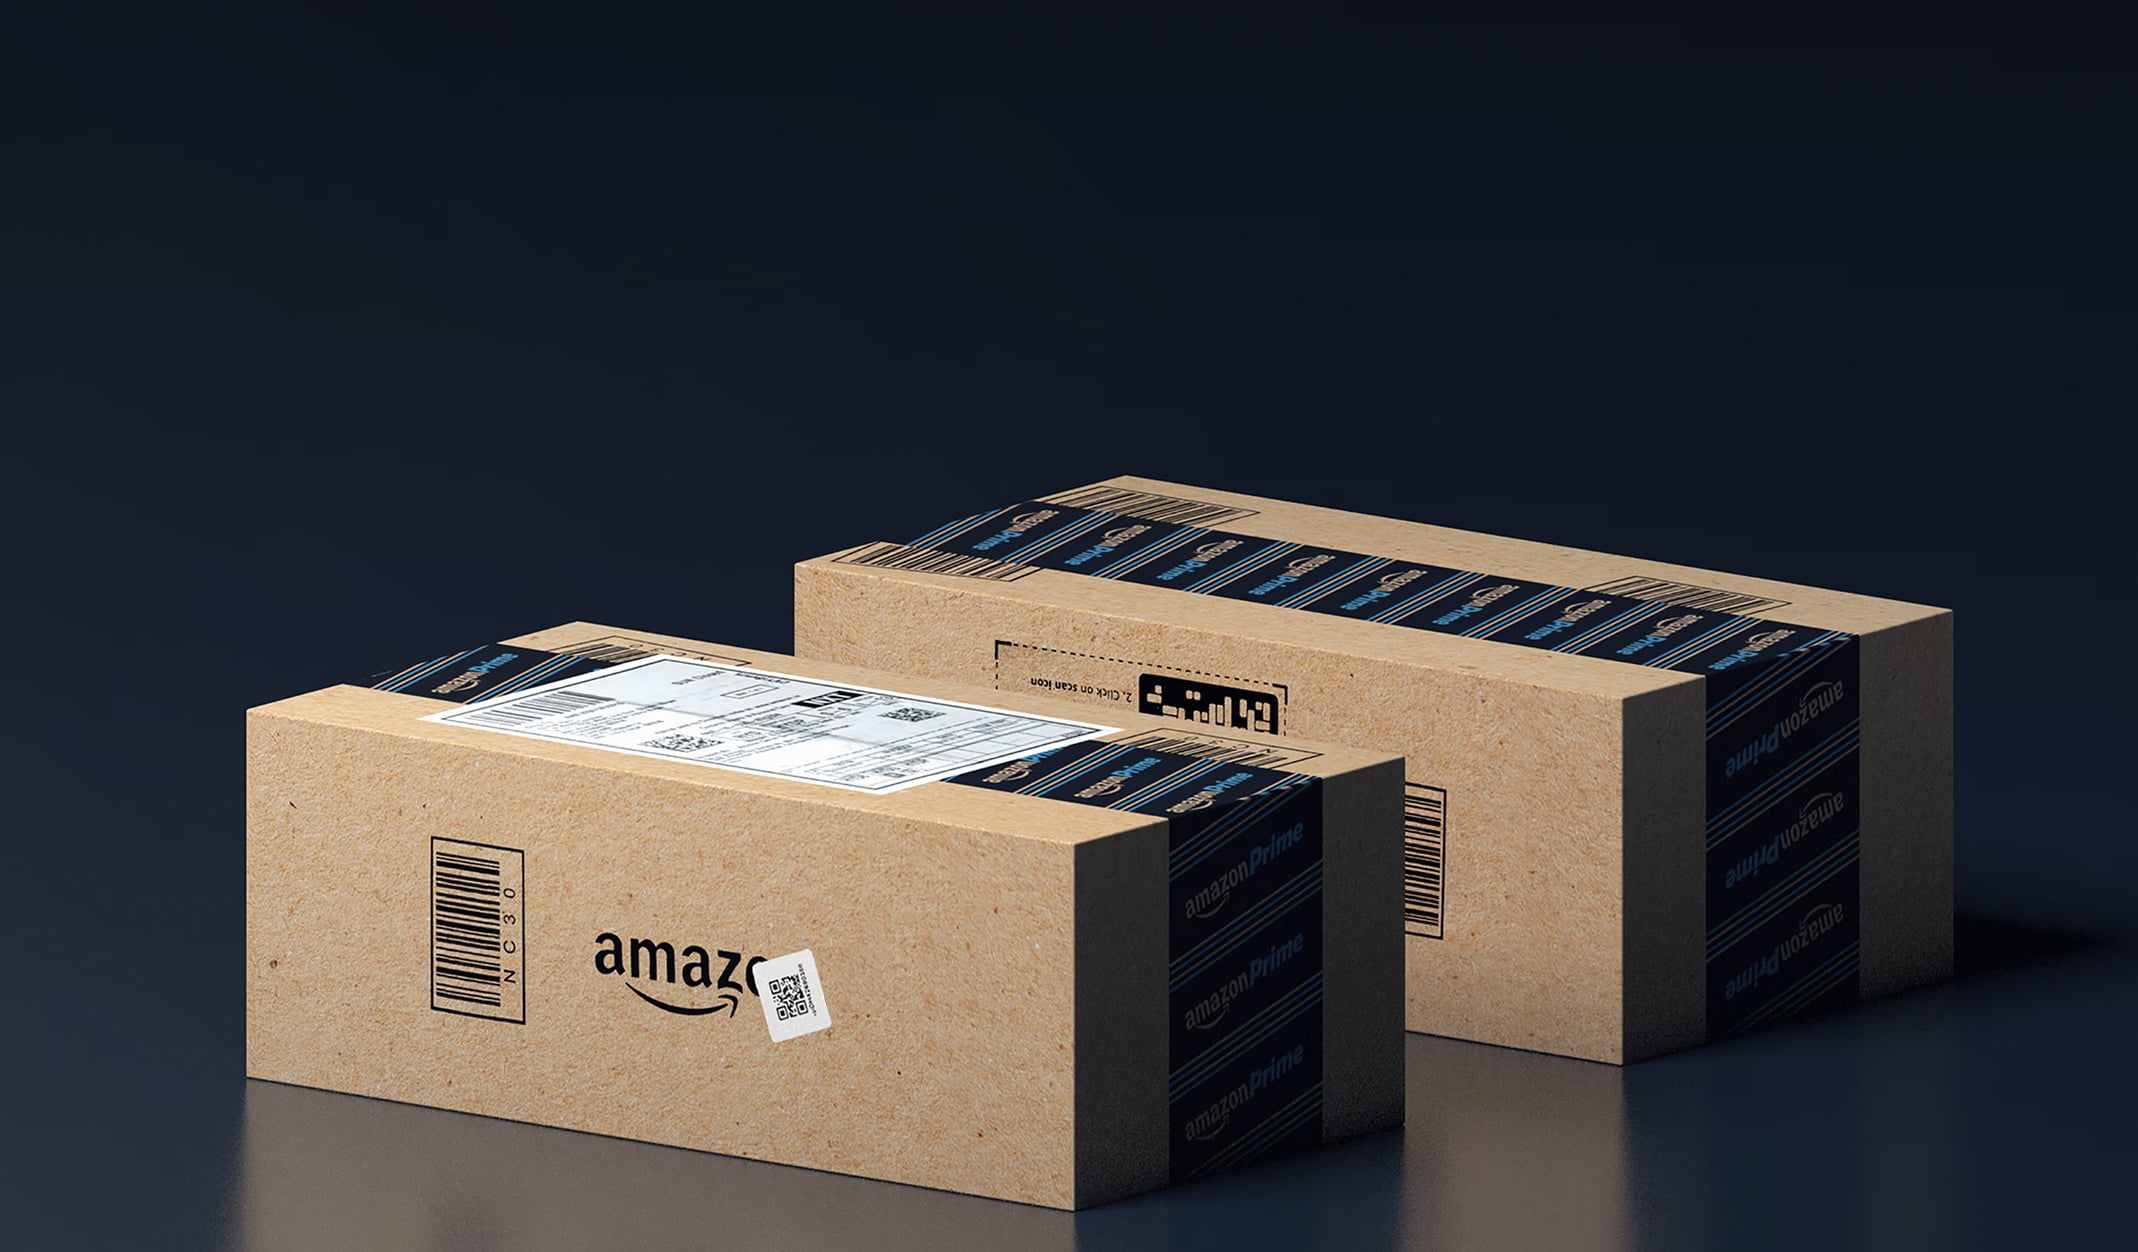 Two Amazon delivery boxes displayed against a dark background